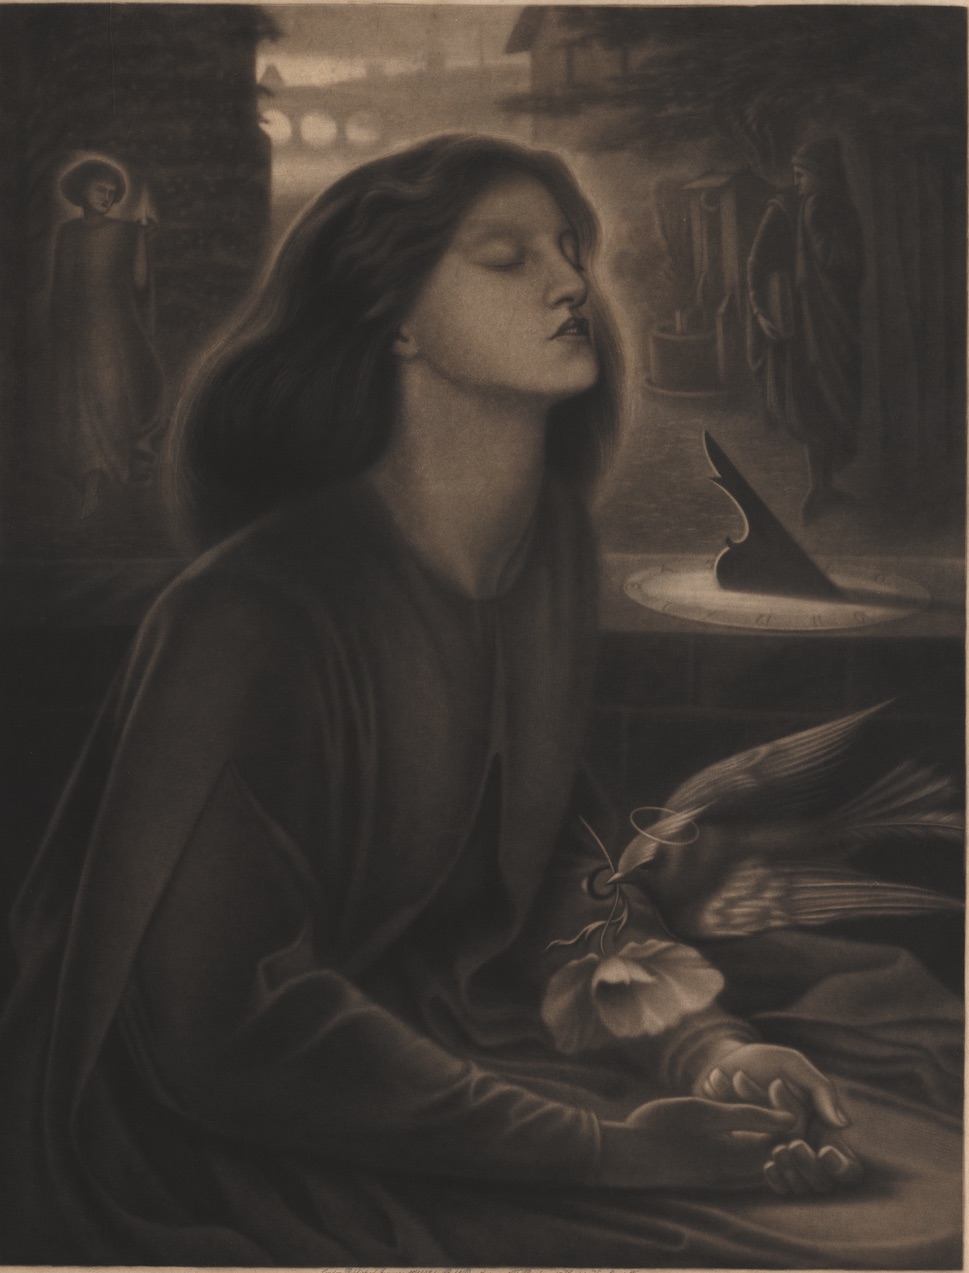 Photogravure print of woman sitting, in halo of light near low brick wall with bird in her lap and figures in background.